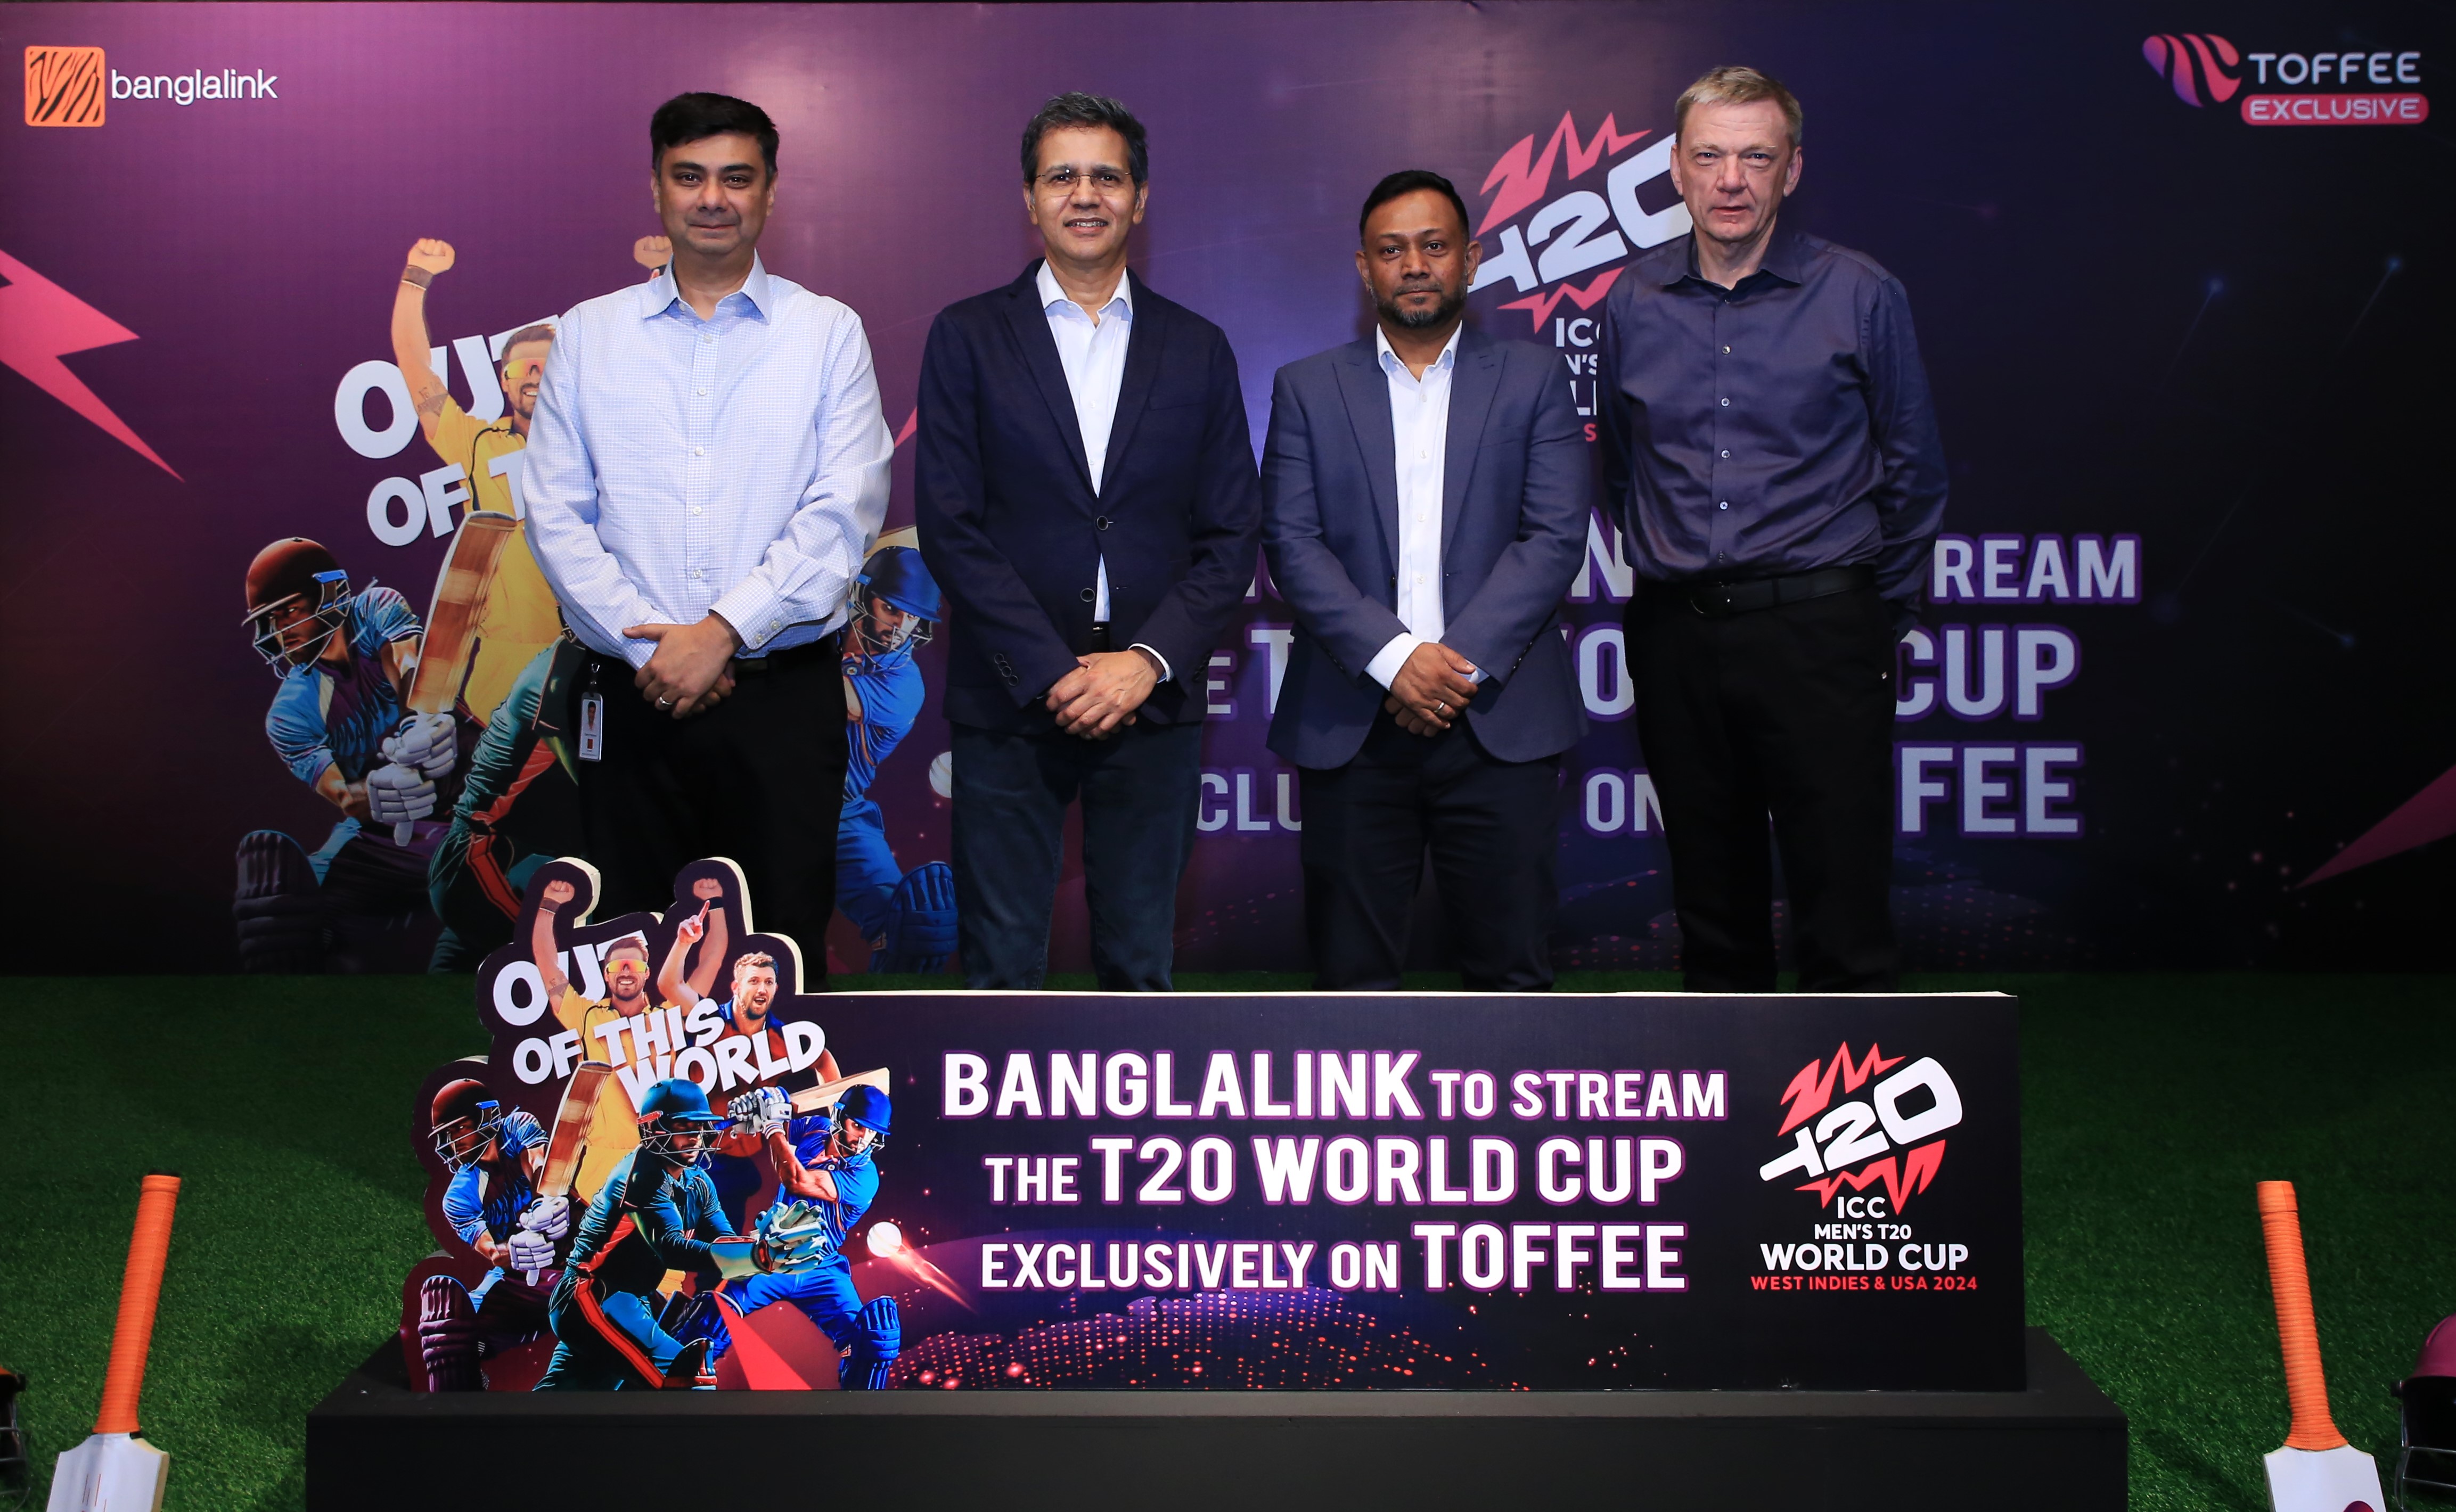 Erik Aas, CEO of Banglalink, together with the leadership team, announces that VEON's digital operator, Banglalink, has secured exclusive nationwide streaming rights for ICC world events until 2025 at a press event held in Dhaka, Bangladesh.